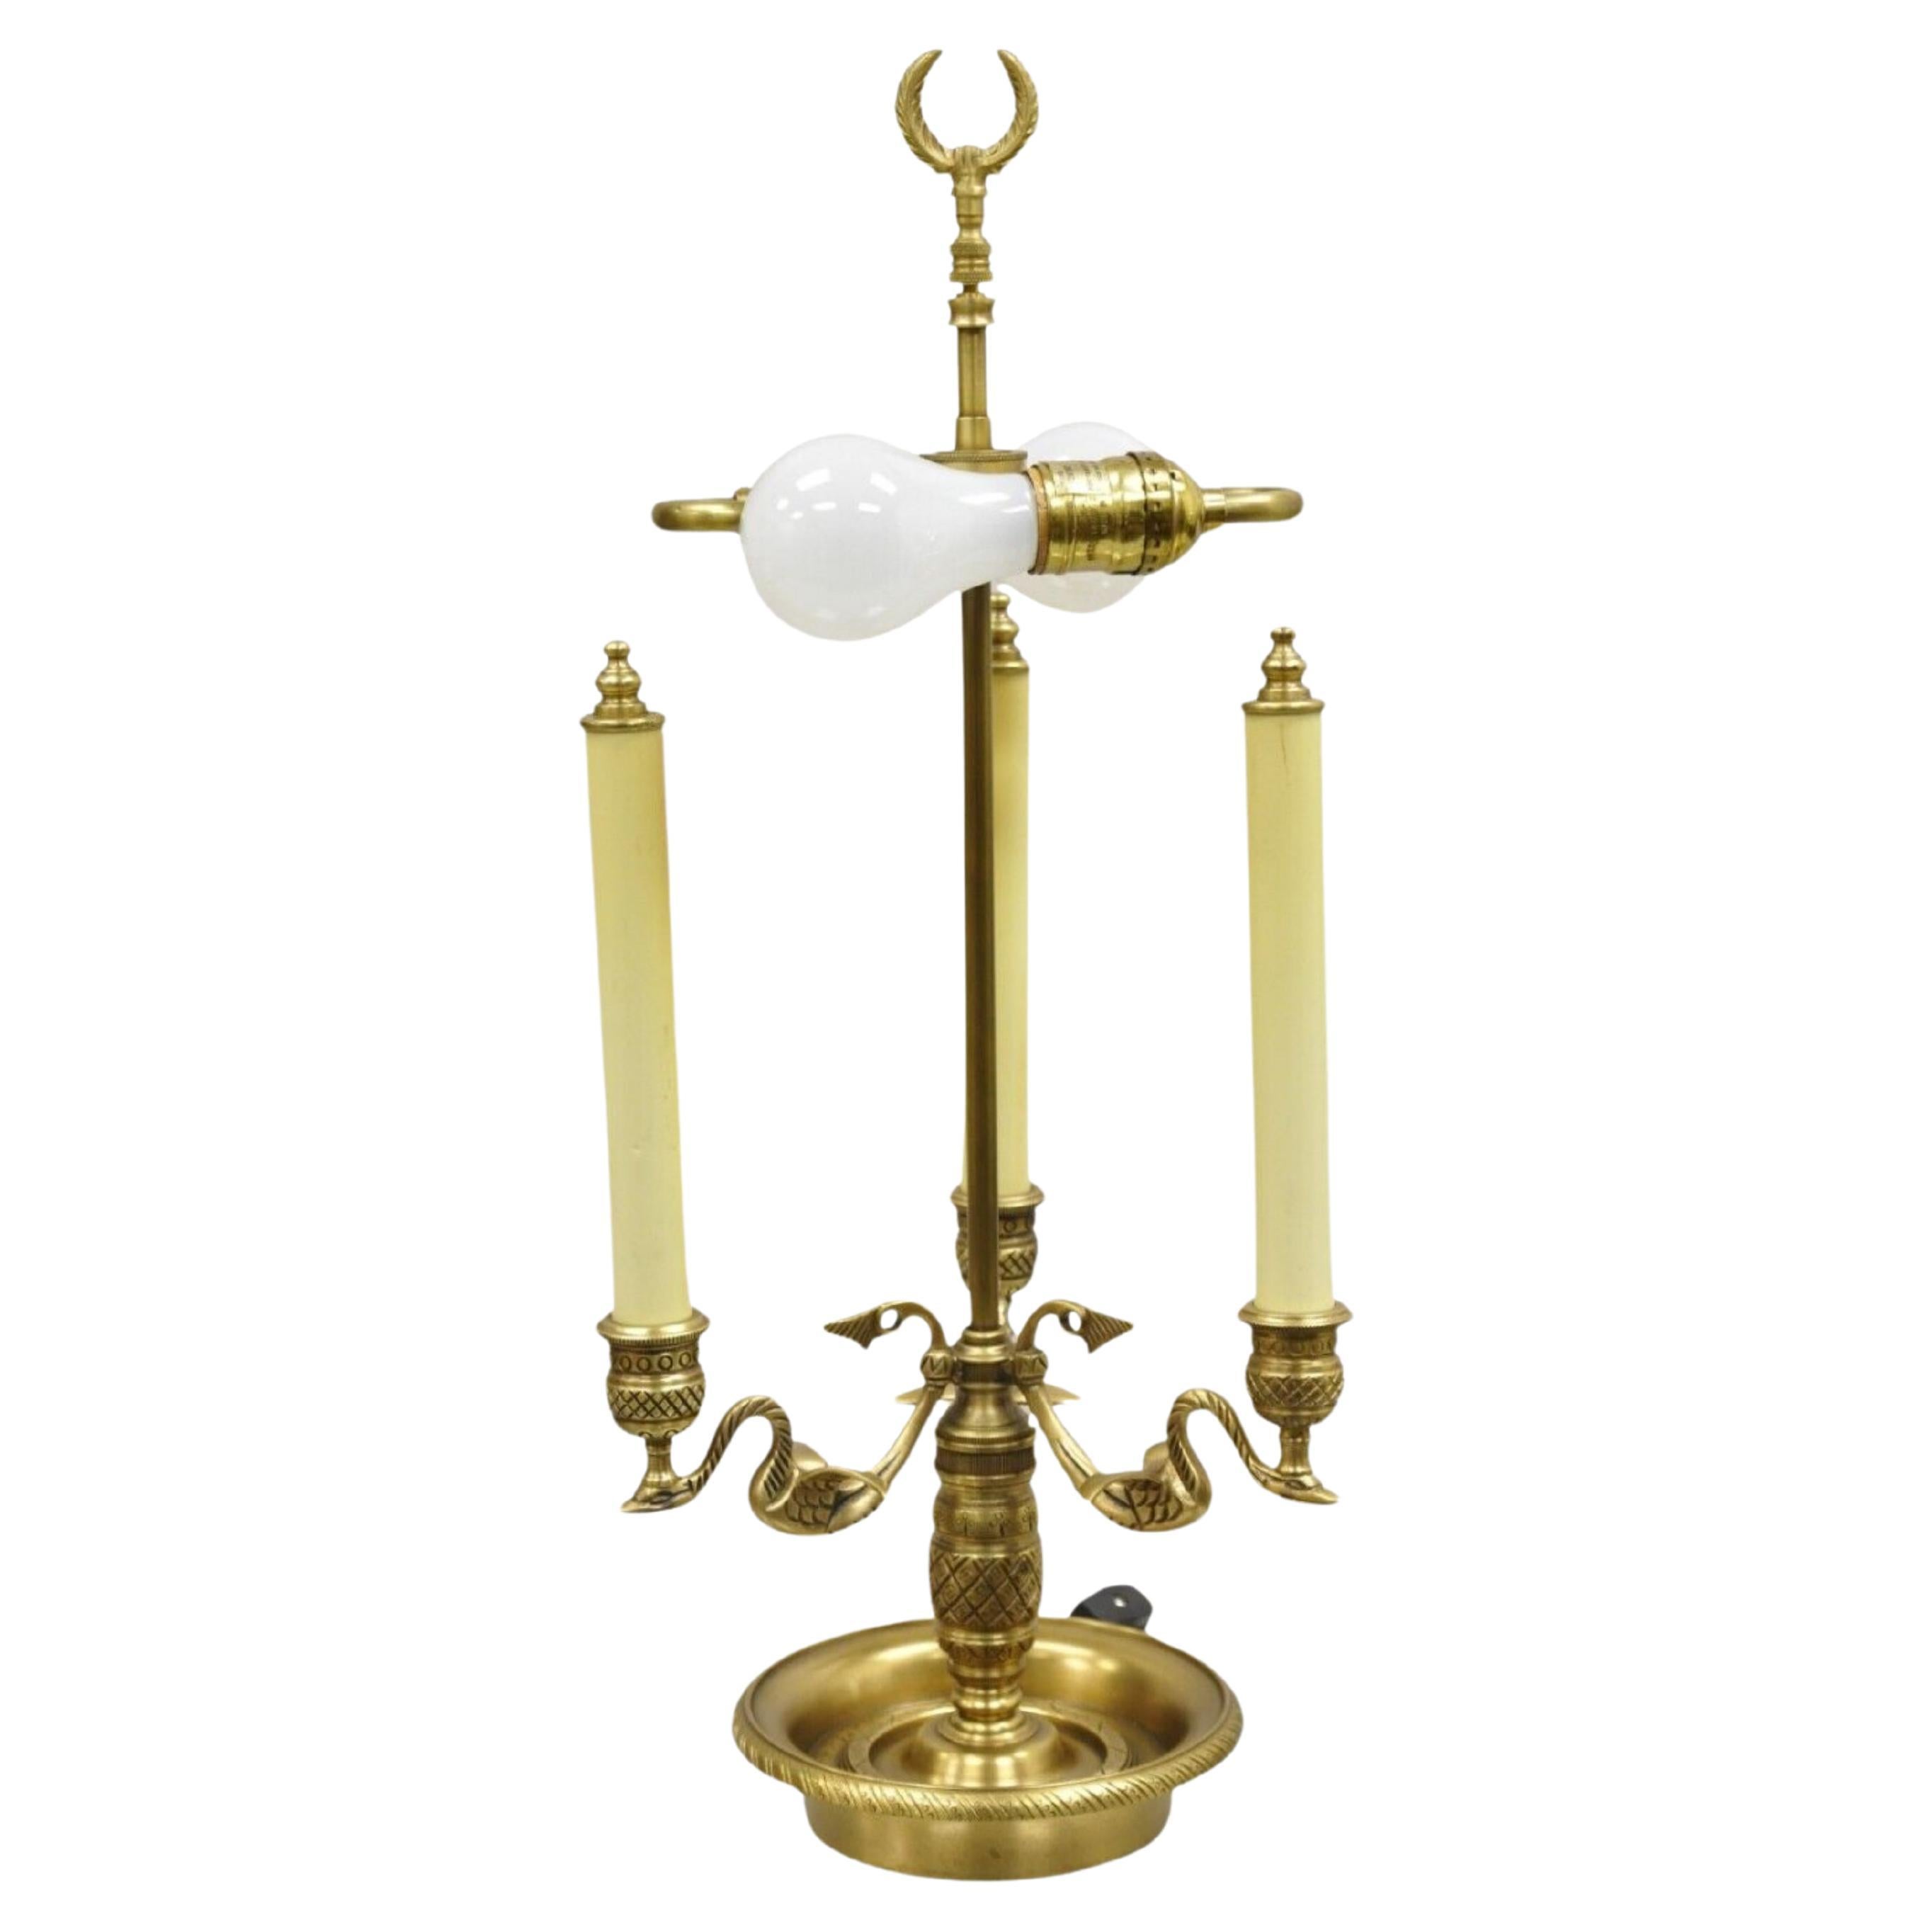 Empire Regency Style Brass Candlestick Bouillotte Desk Table Lamp with Swans (A) For Sale